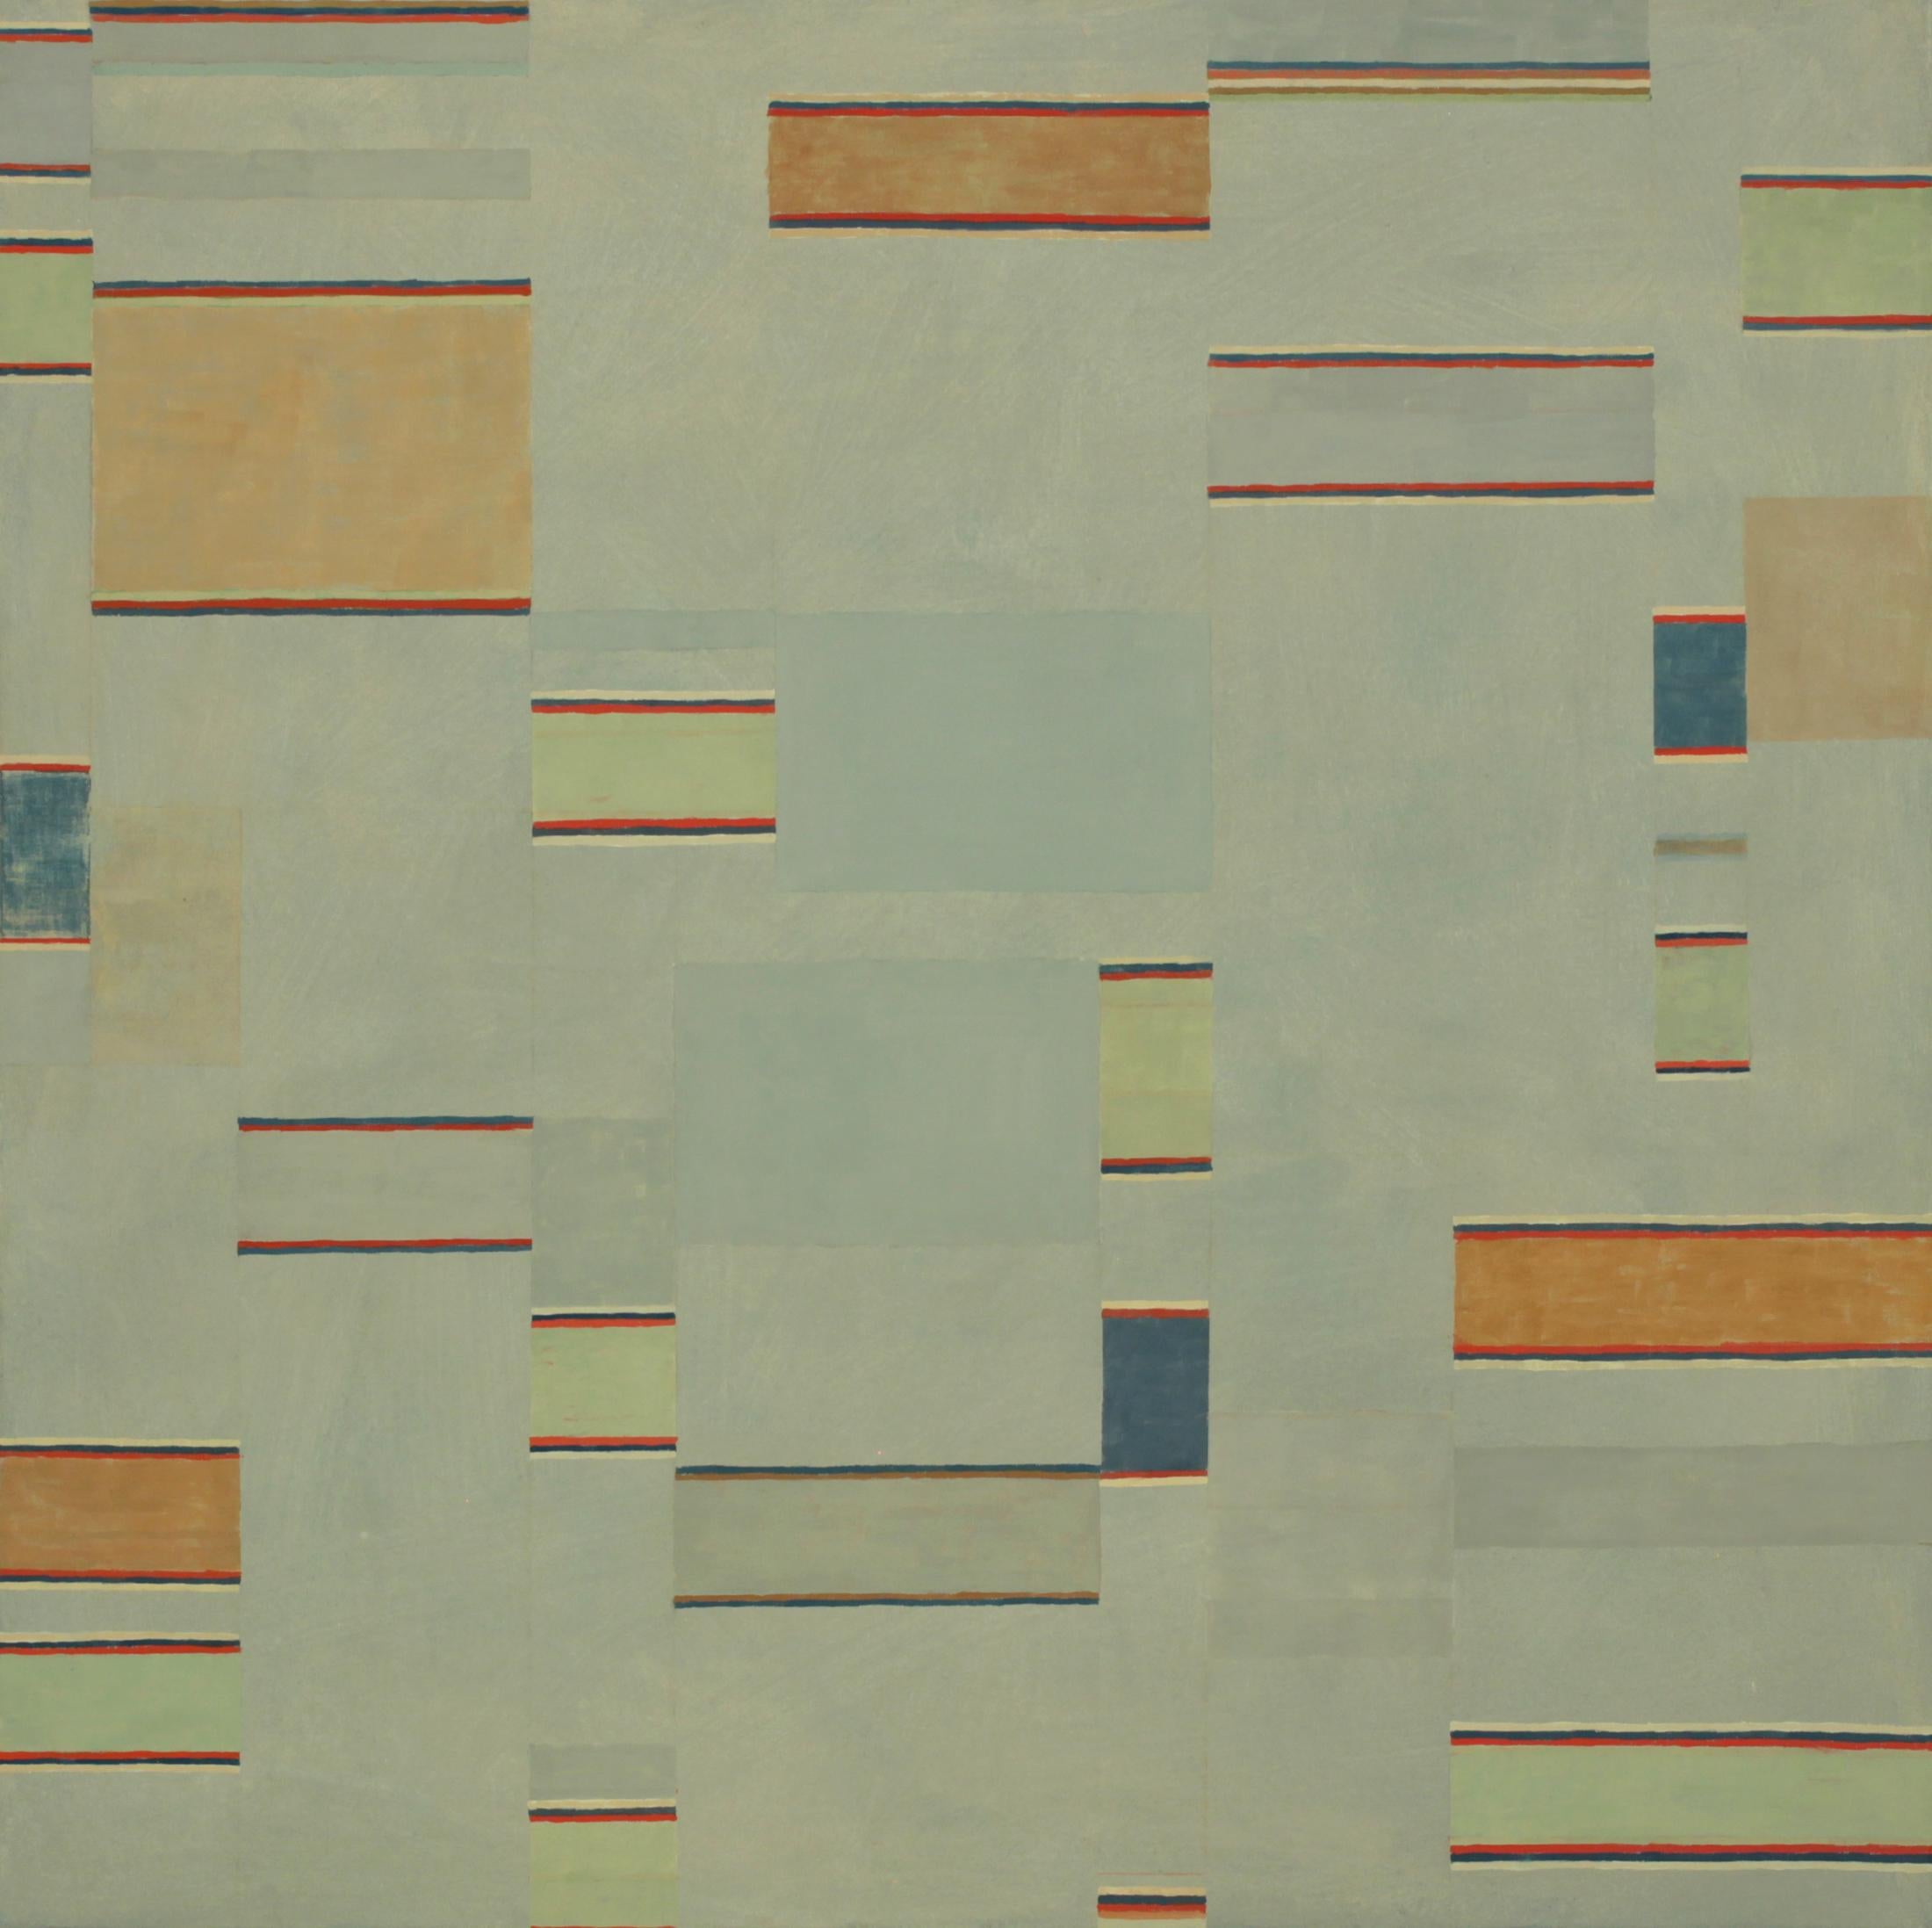 In this square abstract painting in flashe on canvas, clean and precise stripes and blocks of color in soft sage green, light mint green, dark gray blue are carefully ordered. Signed, dated and titled on verso.

Elizabeth Gourlay’s work is a